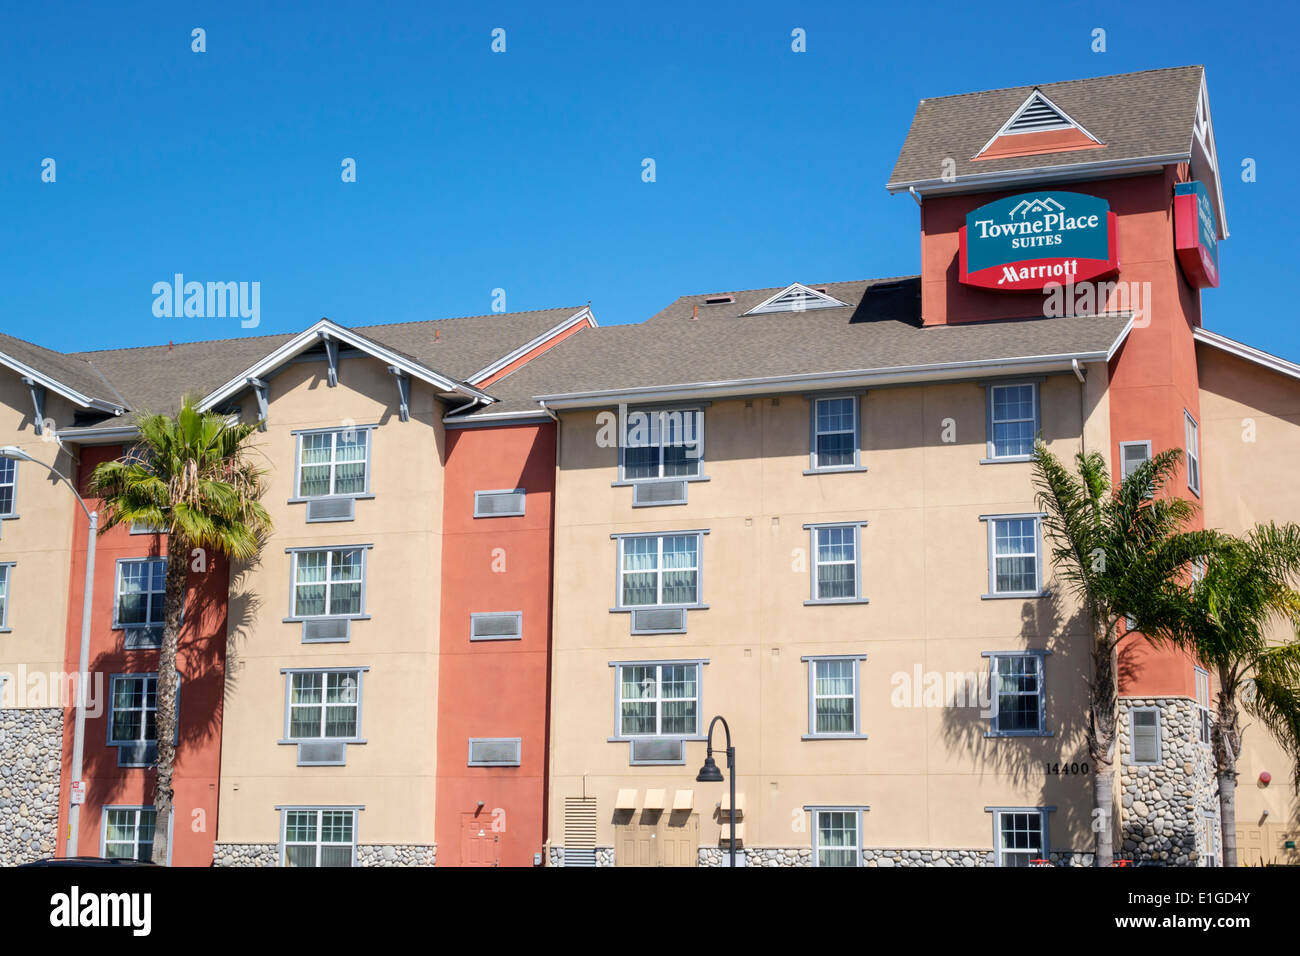 Los Angeles California,Manhattan Beach,Marriott,TownePlace Suites,extended-stay,hotel,chain,hospitality,lodging,four-story,building,exterior,sign,sign Stock Photo